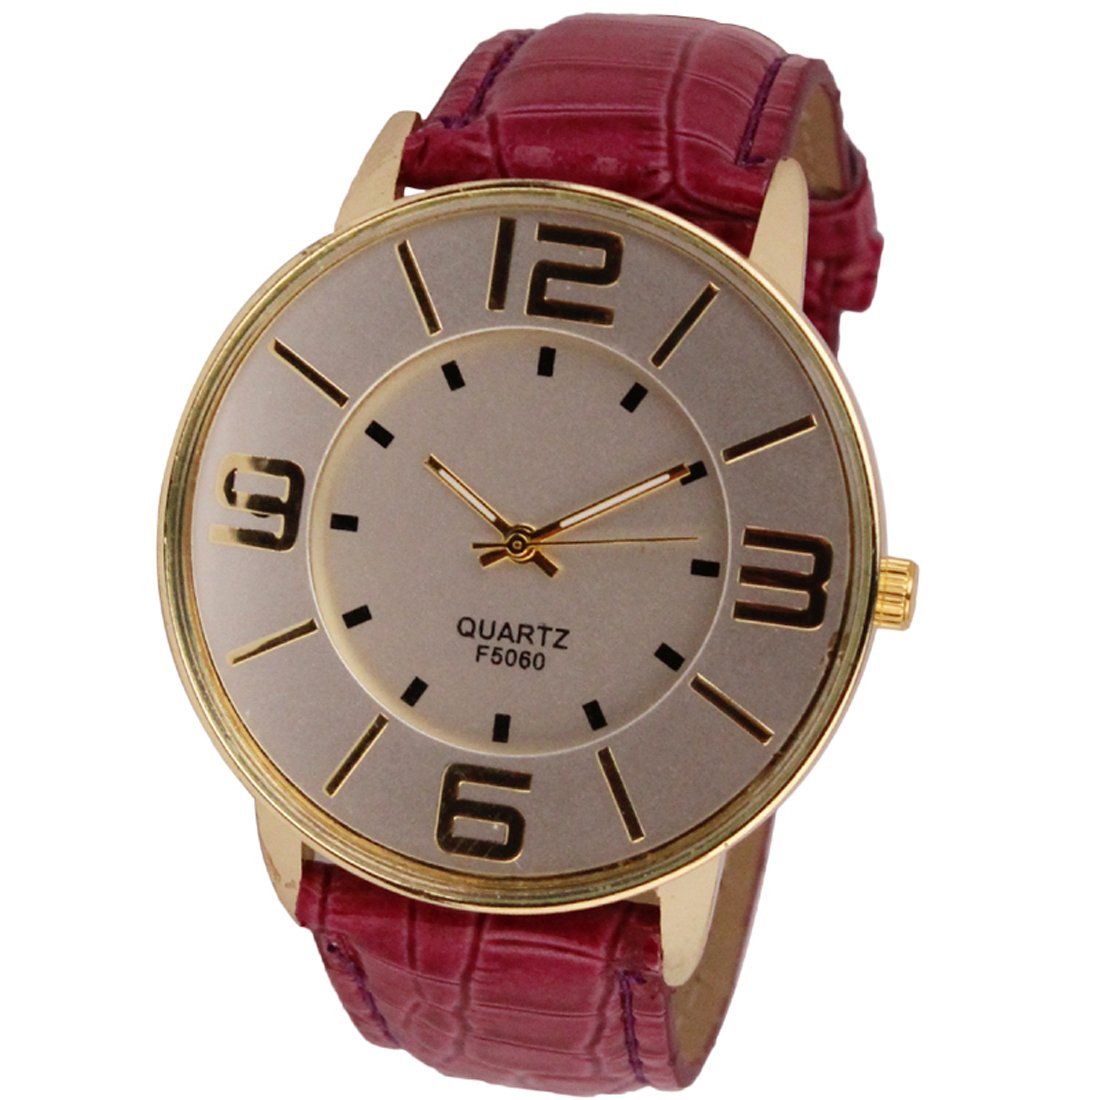 Meily(TM) Womens Numerals Gold Dial Leather Analog Quartz Watch